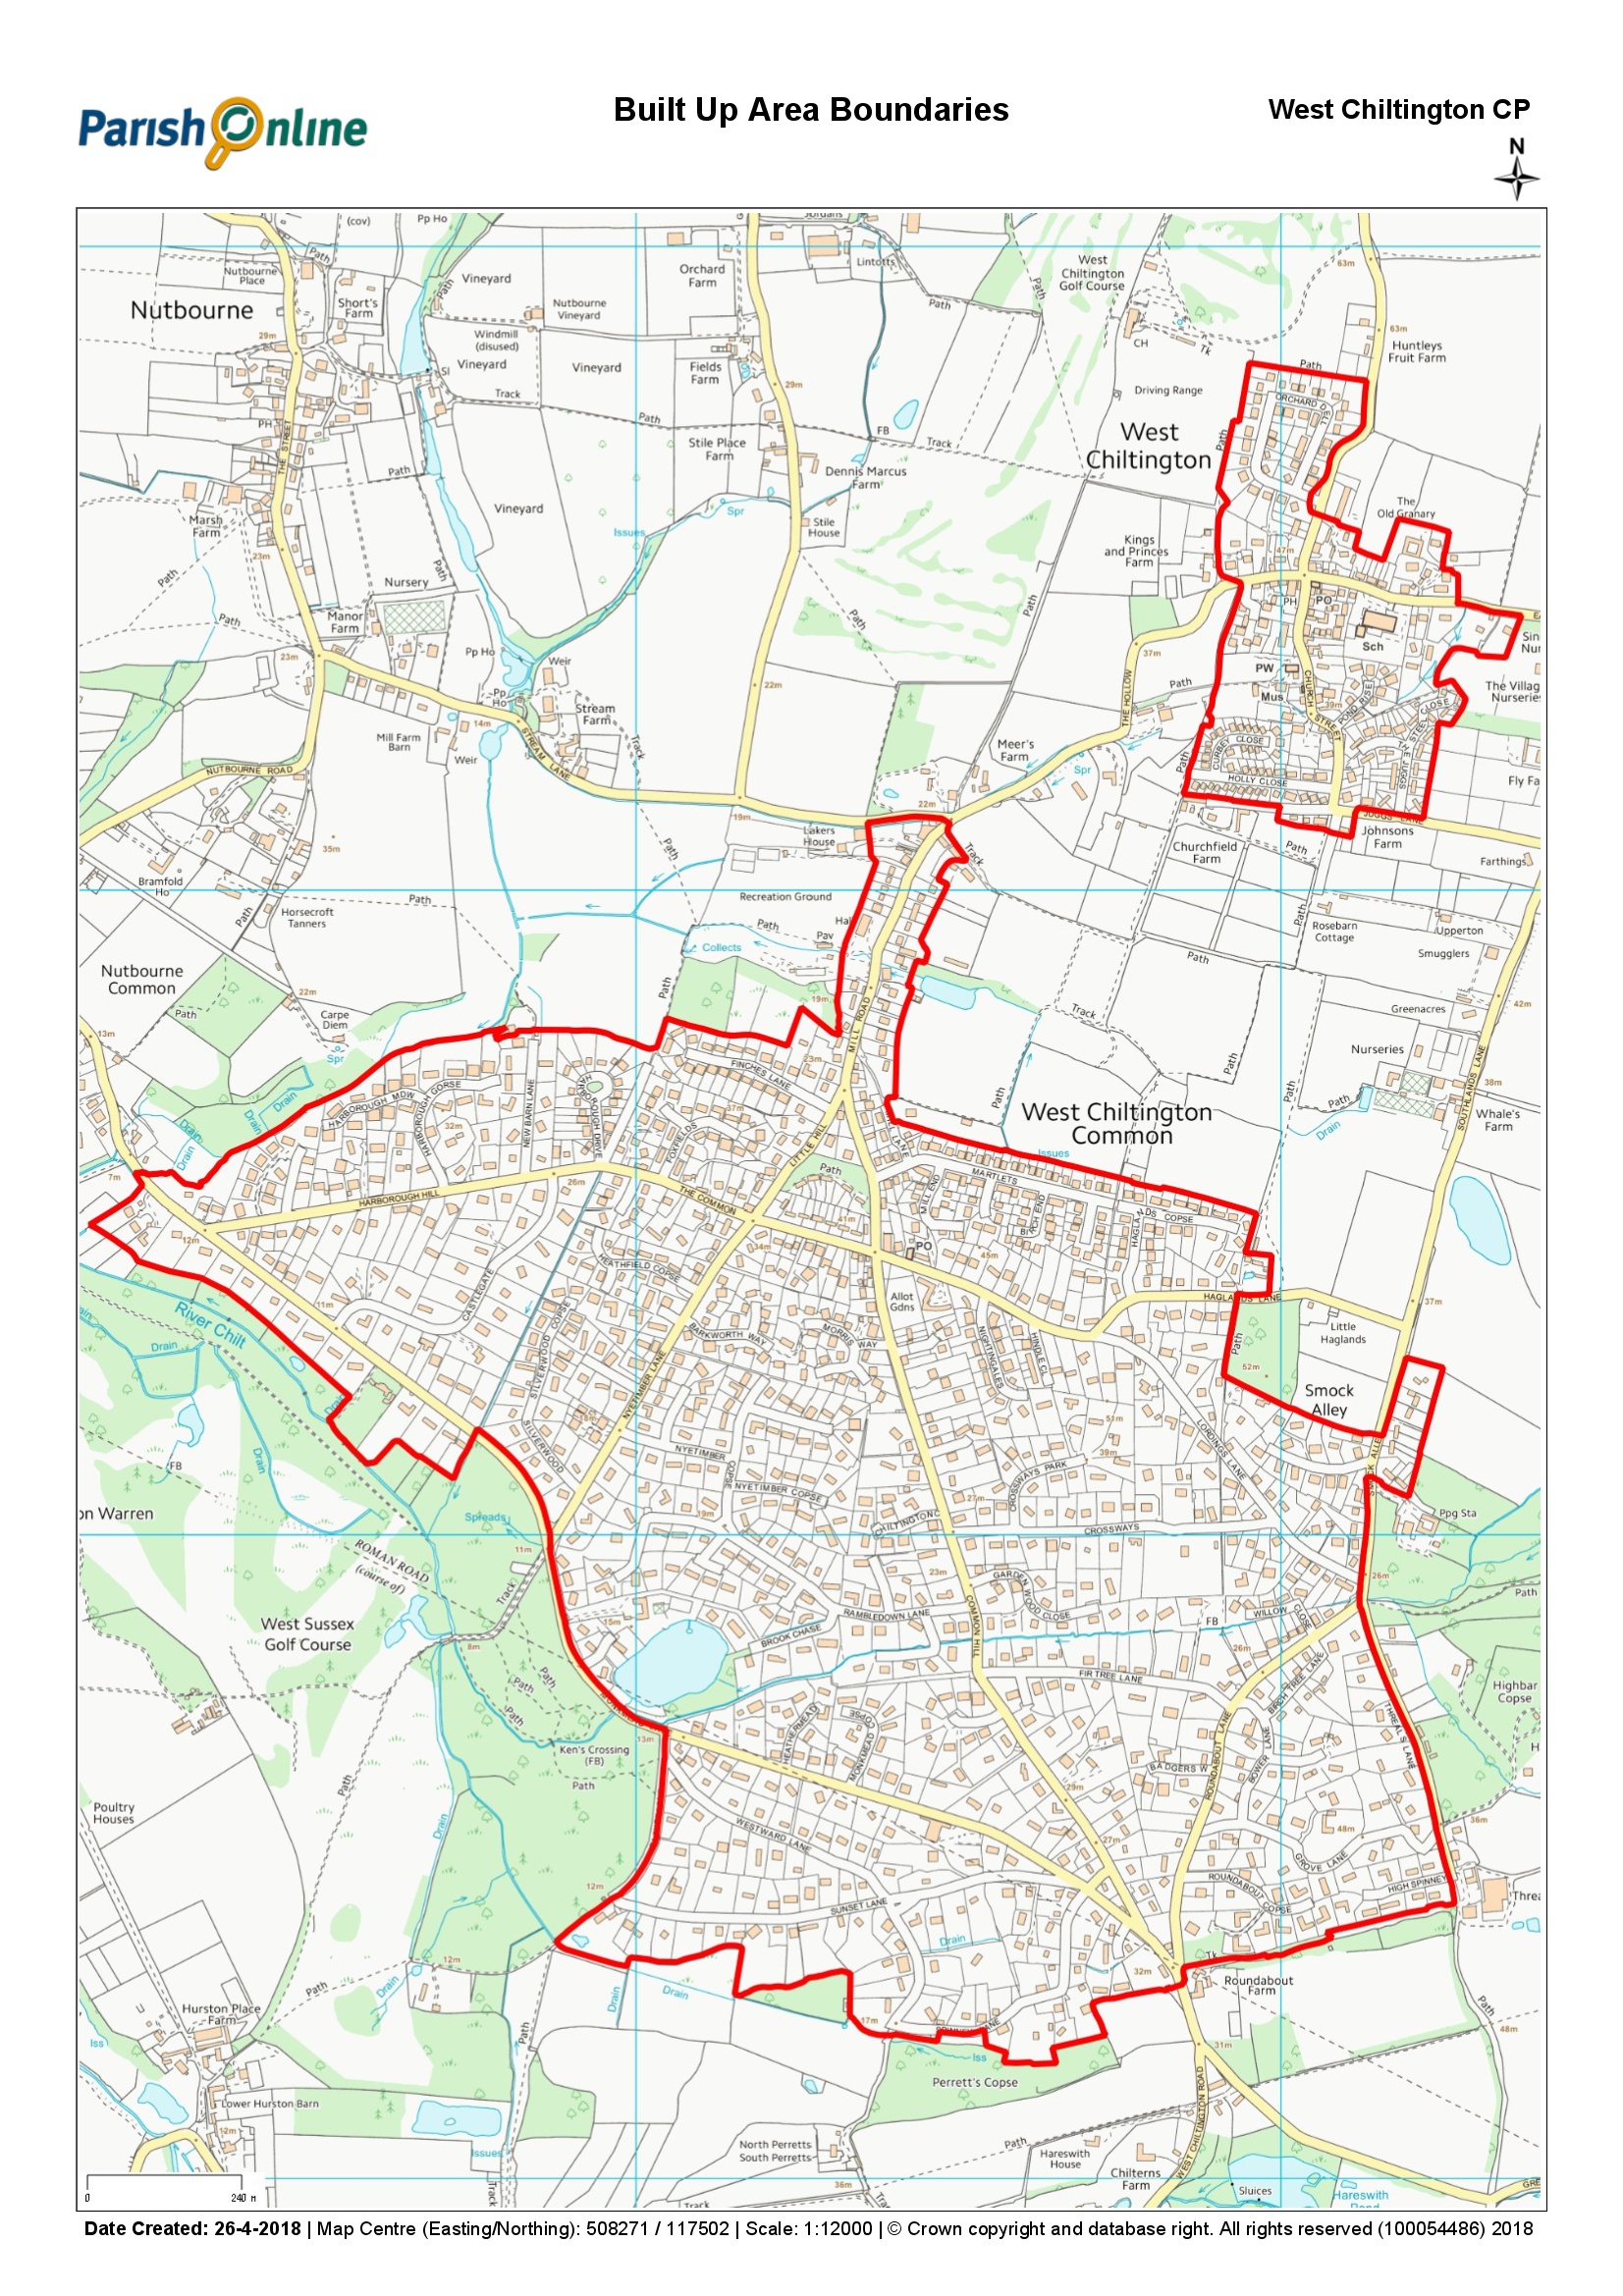 Map of the Built up Area Boundaries